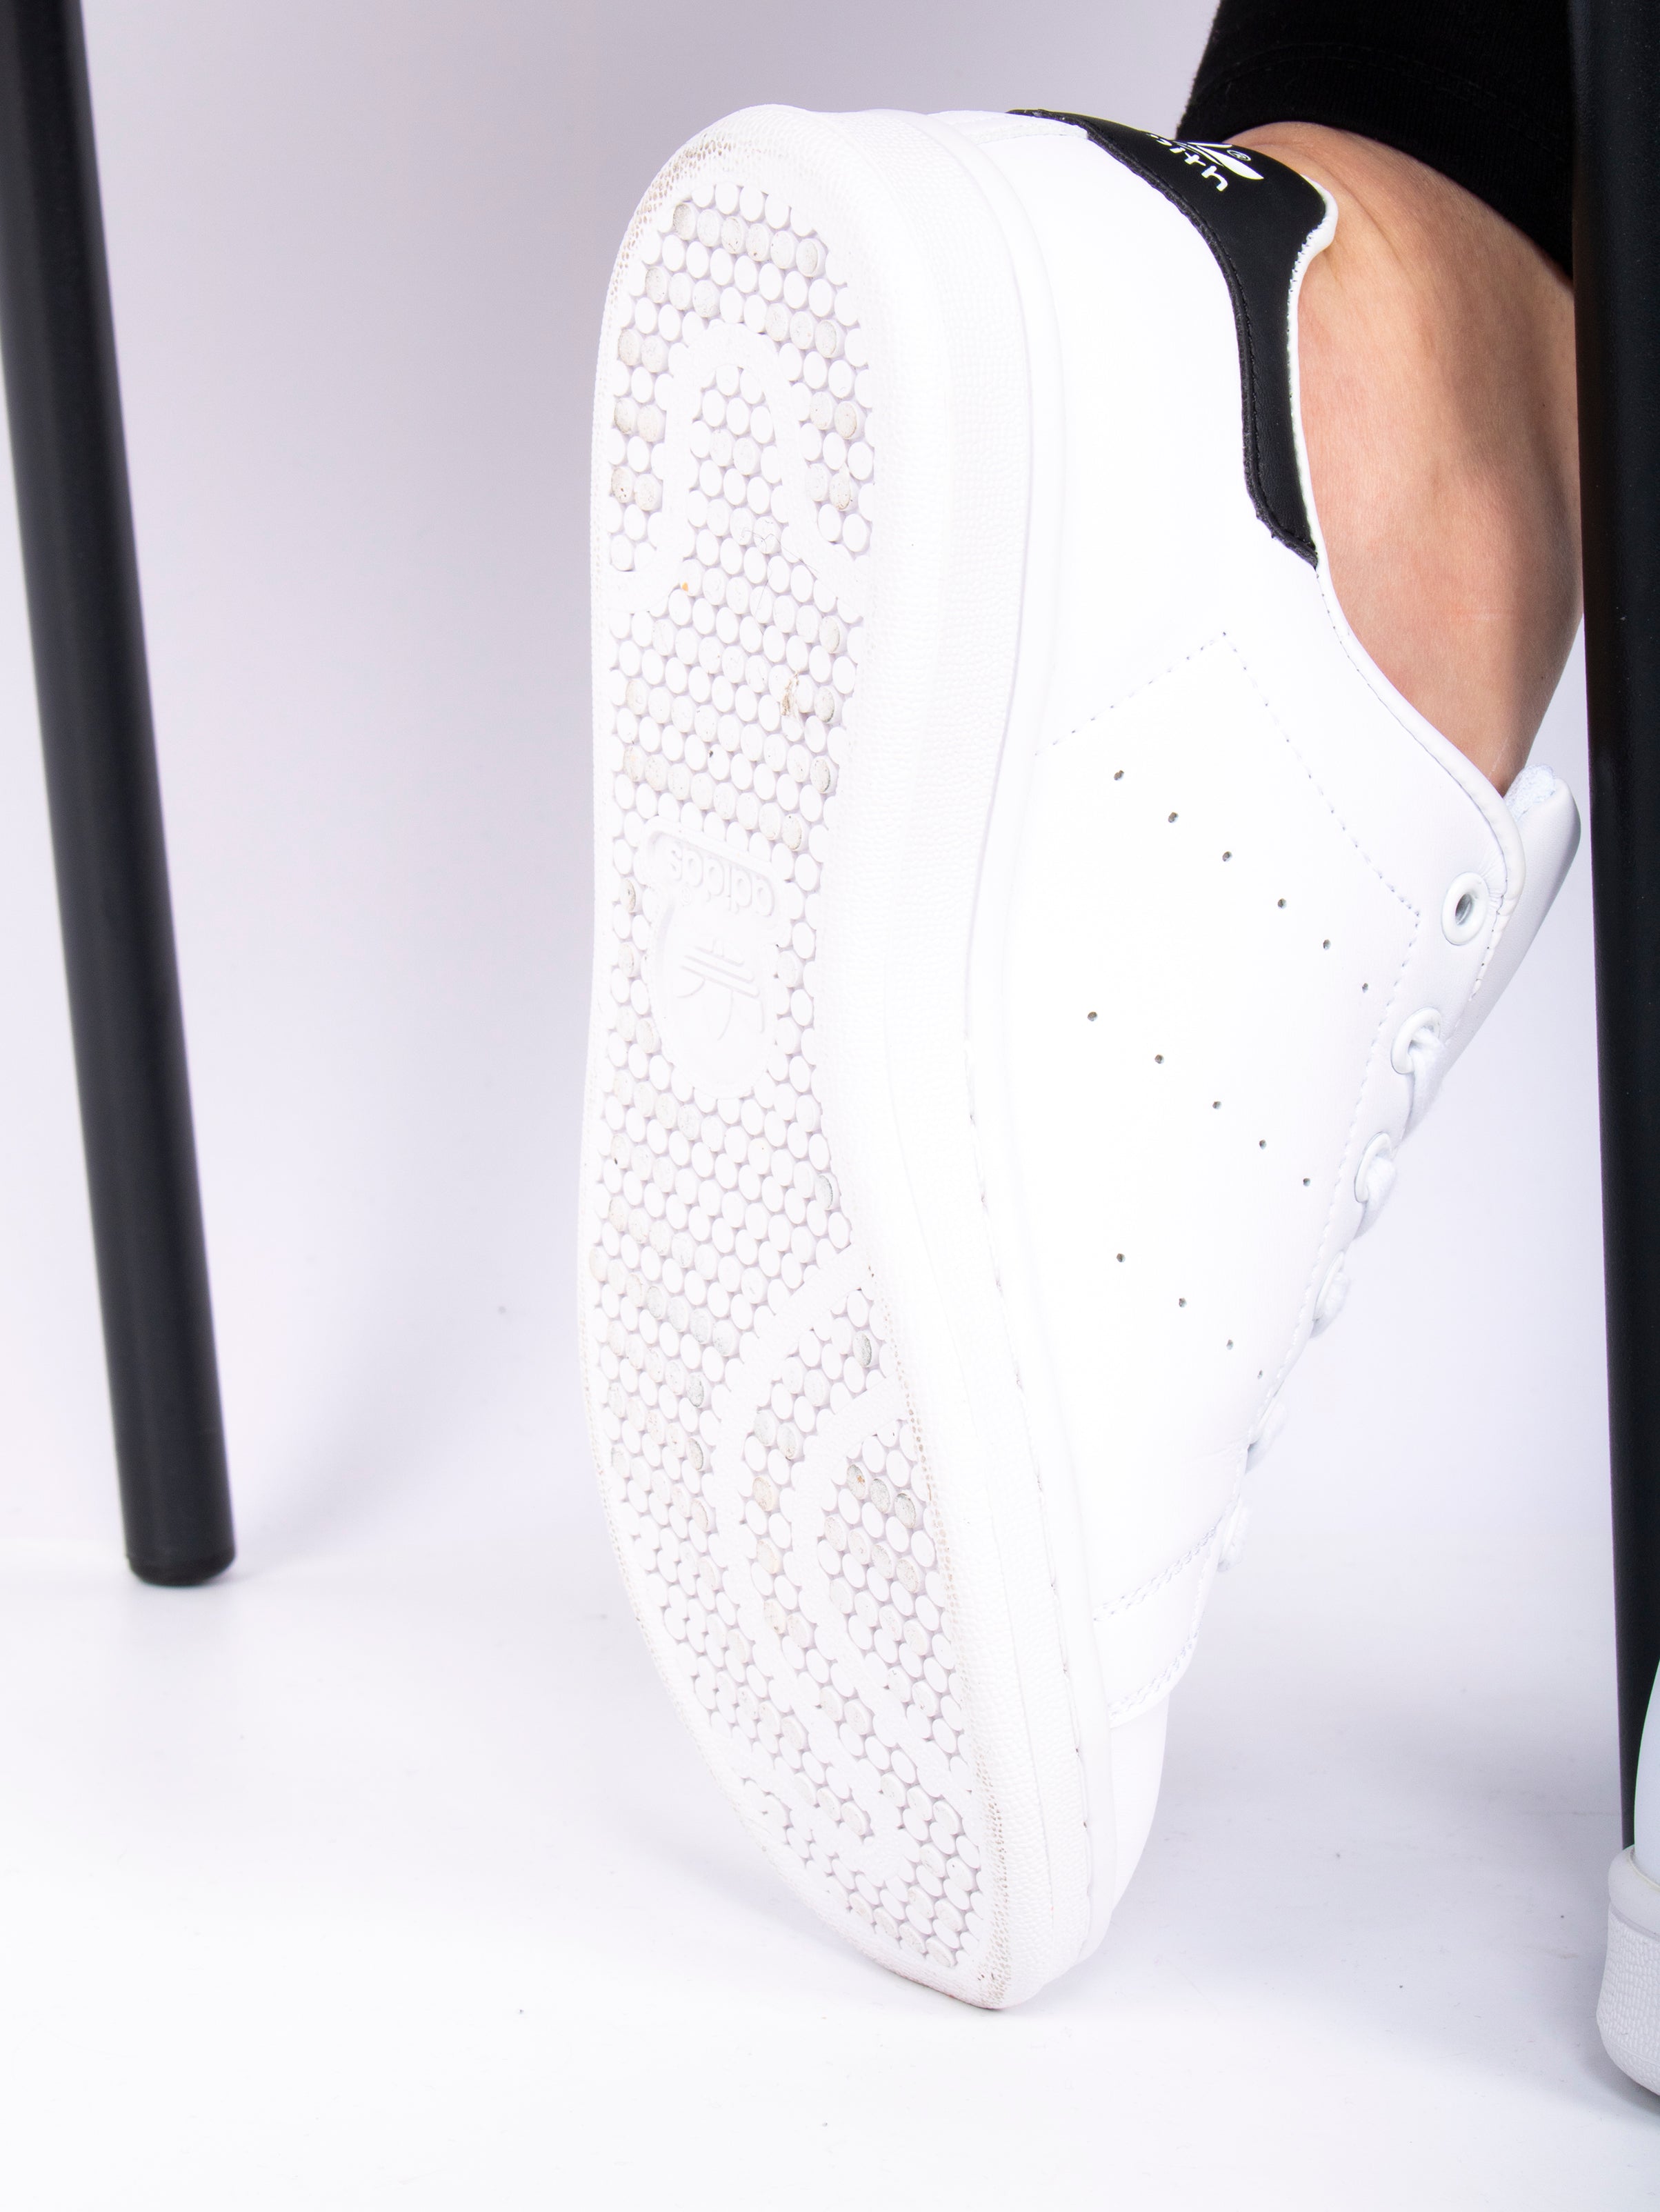 Adidas Stansmith WHITE AND BLACK